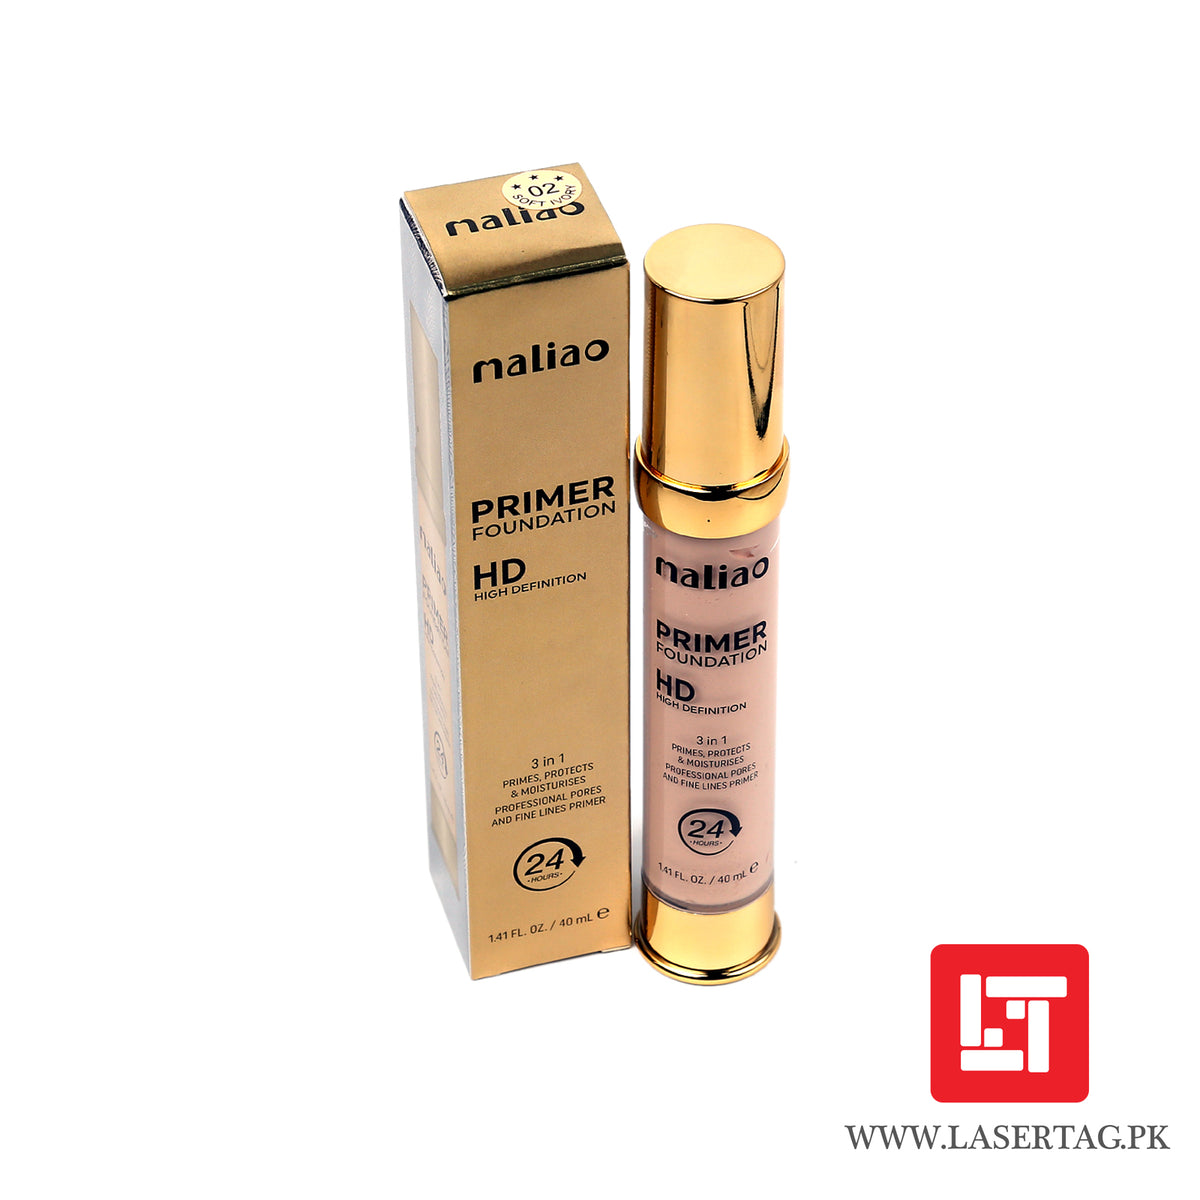 Maliao Primer Foundation HD High Definition 3 In 1 PRimes, Protects &amp; Moisturises Soft Ivory M175-02 40ml freeshipping - lasertag.pk